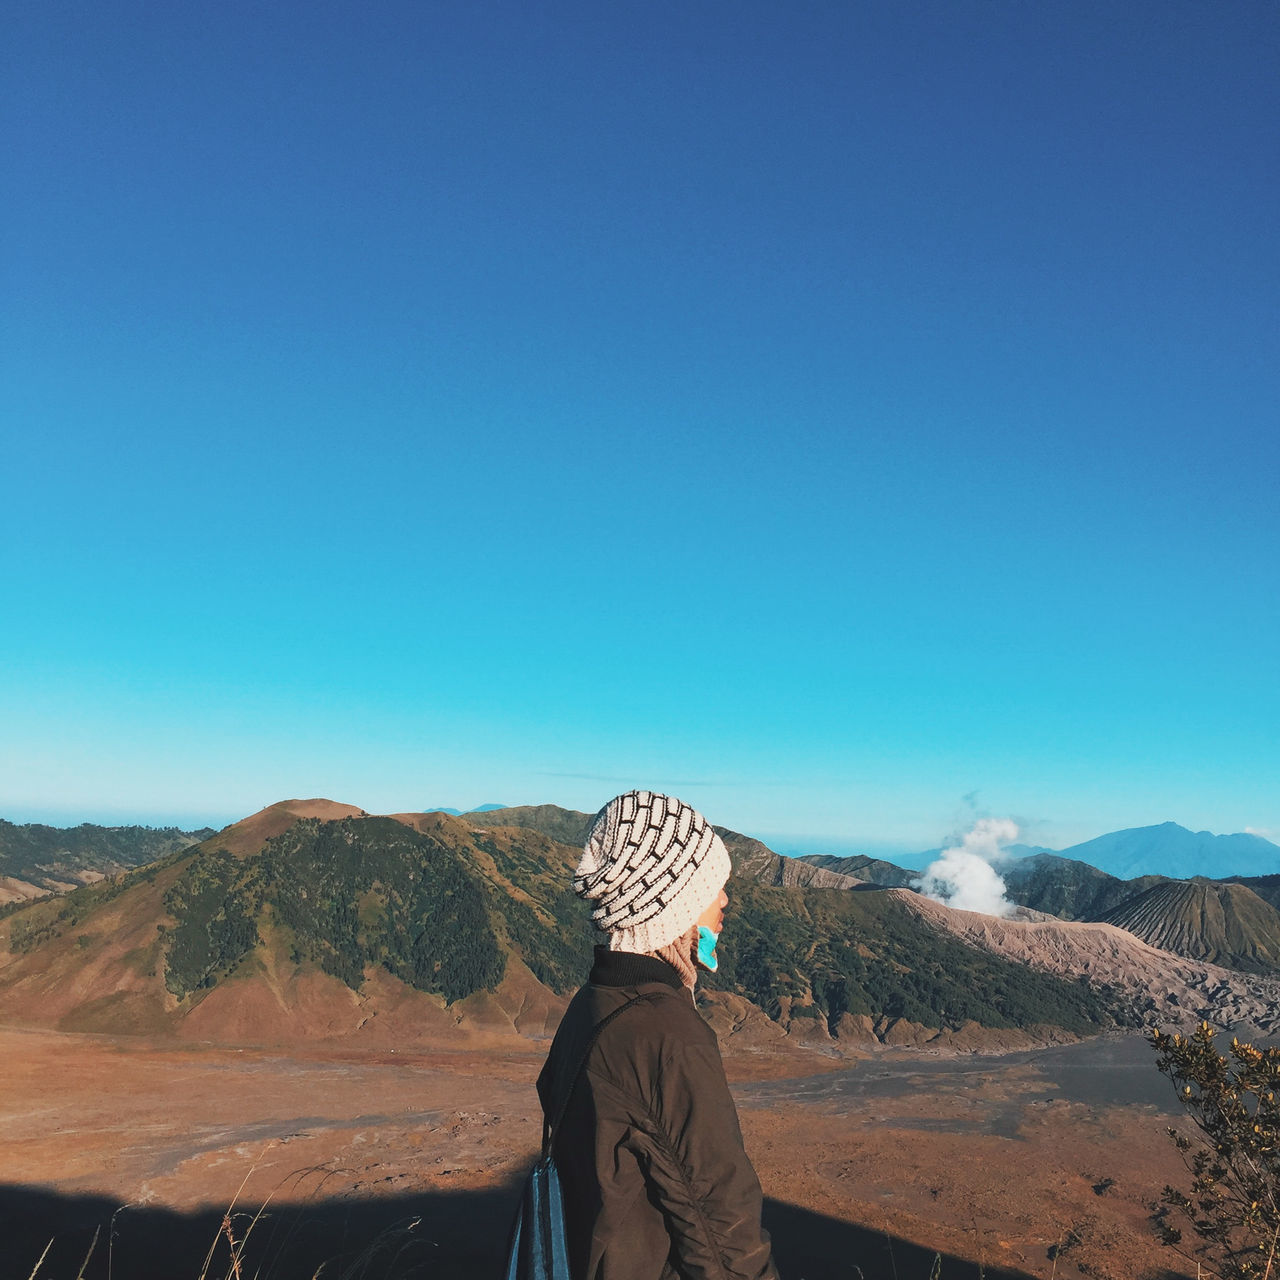 real people, mountain, scenics - nature, sky, copy space, leisure activity, lifestyles, beauty in nature, nature, rear view, clear sky, one person, blue, non-urban scene, environment, clothing, tranquility, landscape, day, mountain range, outdoors, looking at view, climate, arid climate